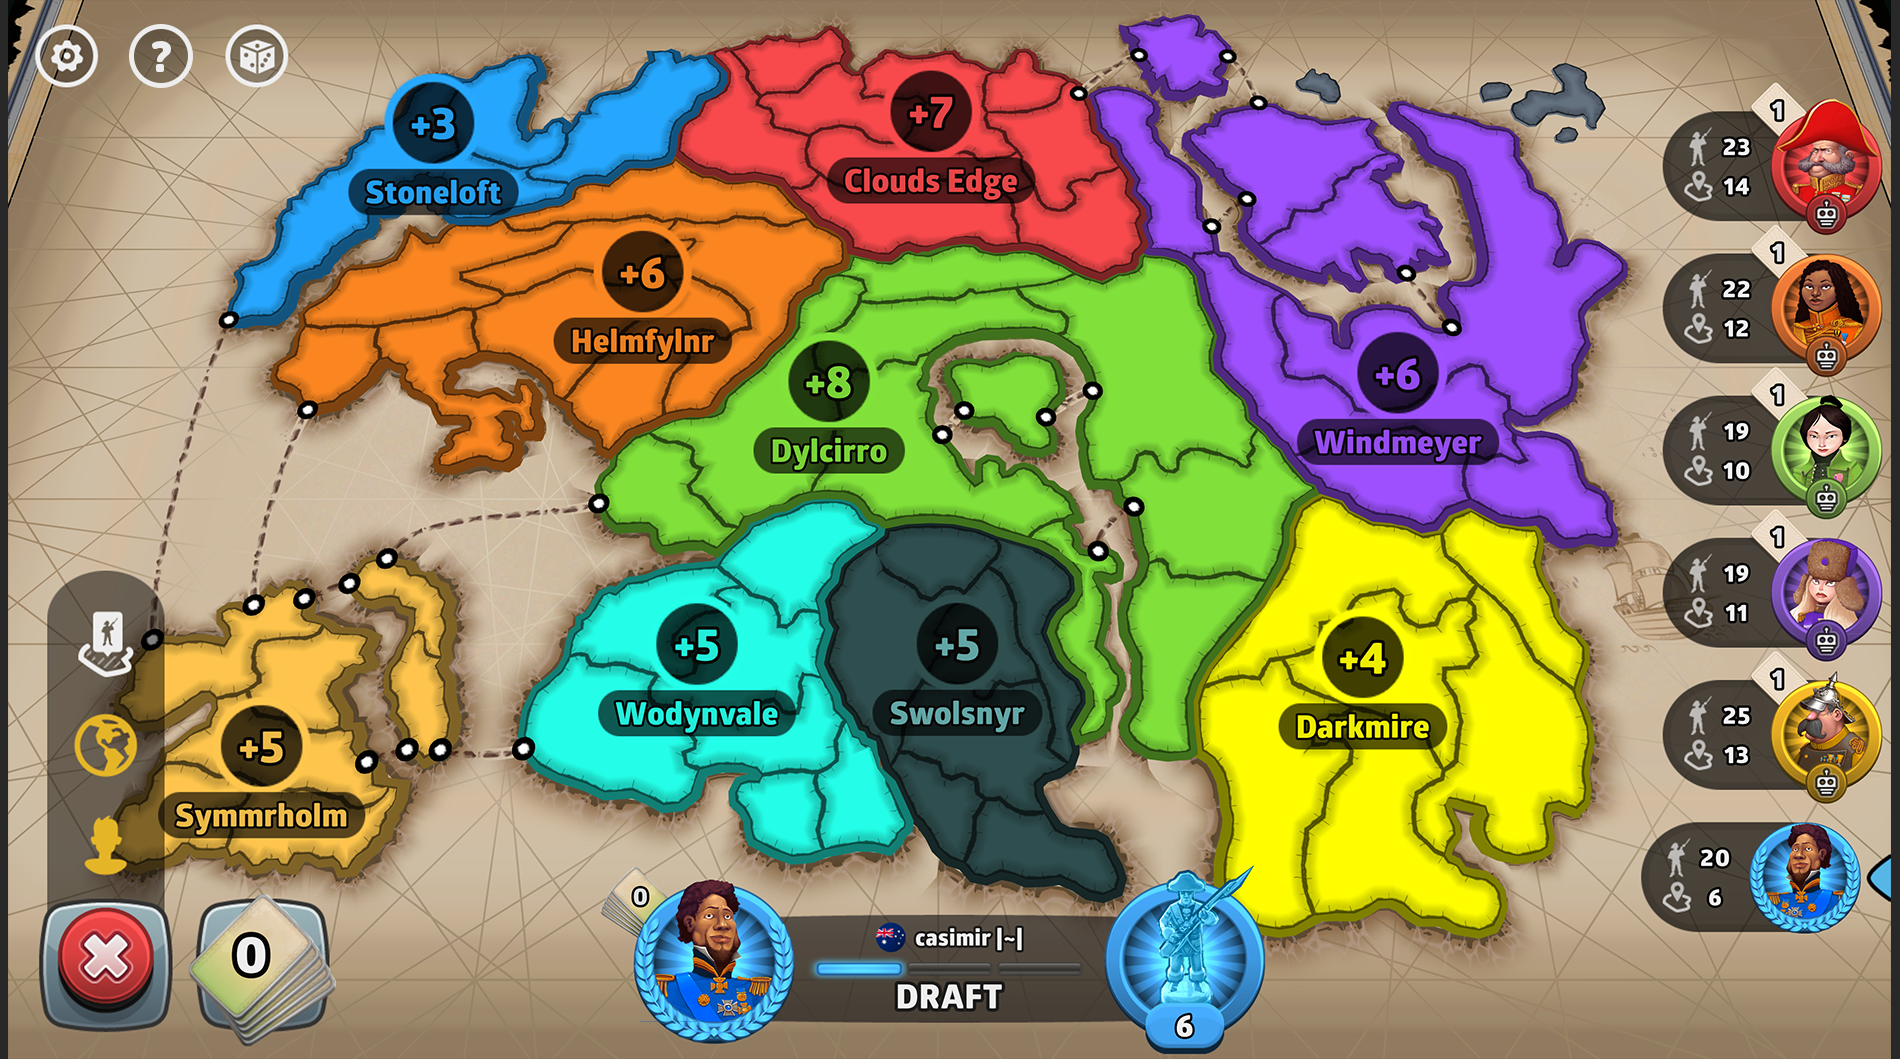 Risk Strike sells a 20-minute version of the classic world domination board  game, sans world map